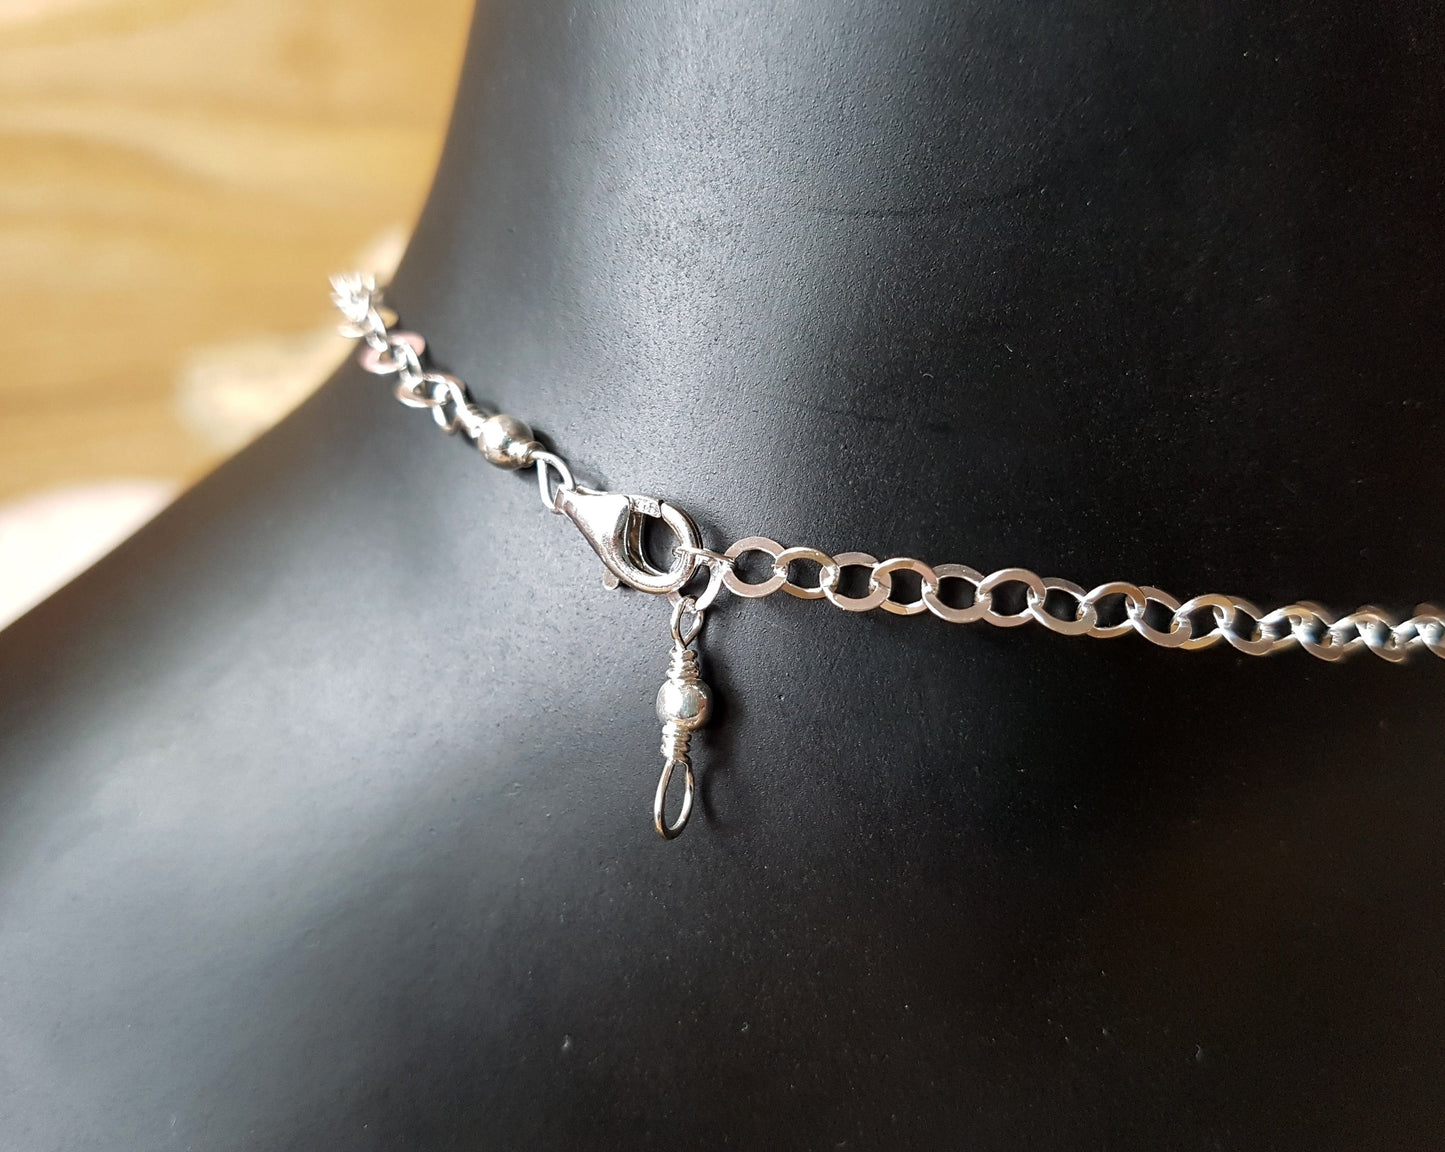 clasp and end of Anklet